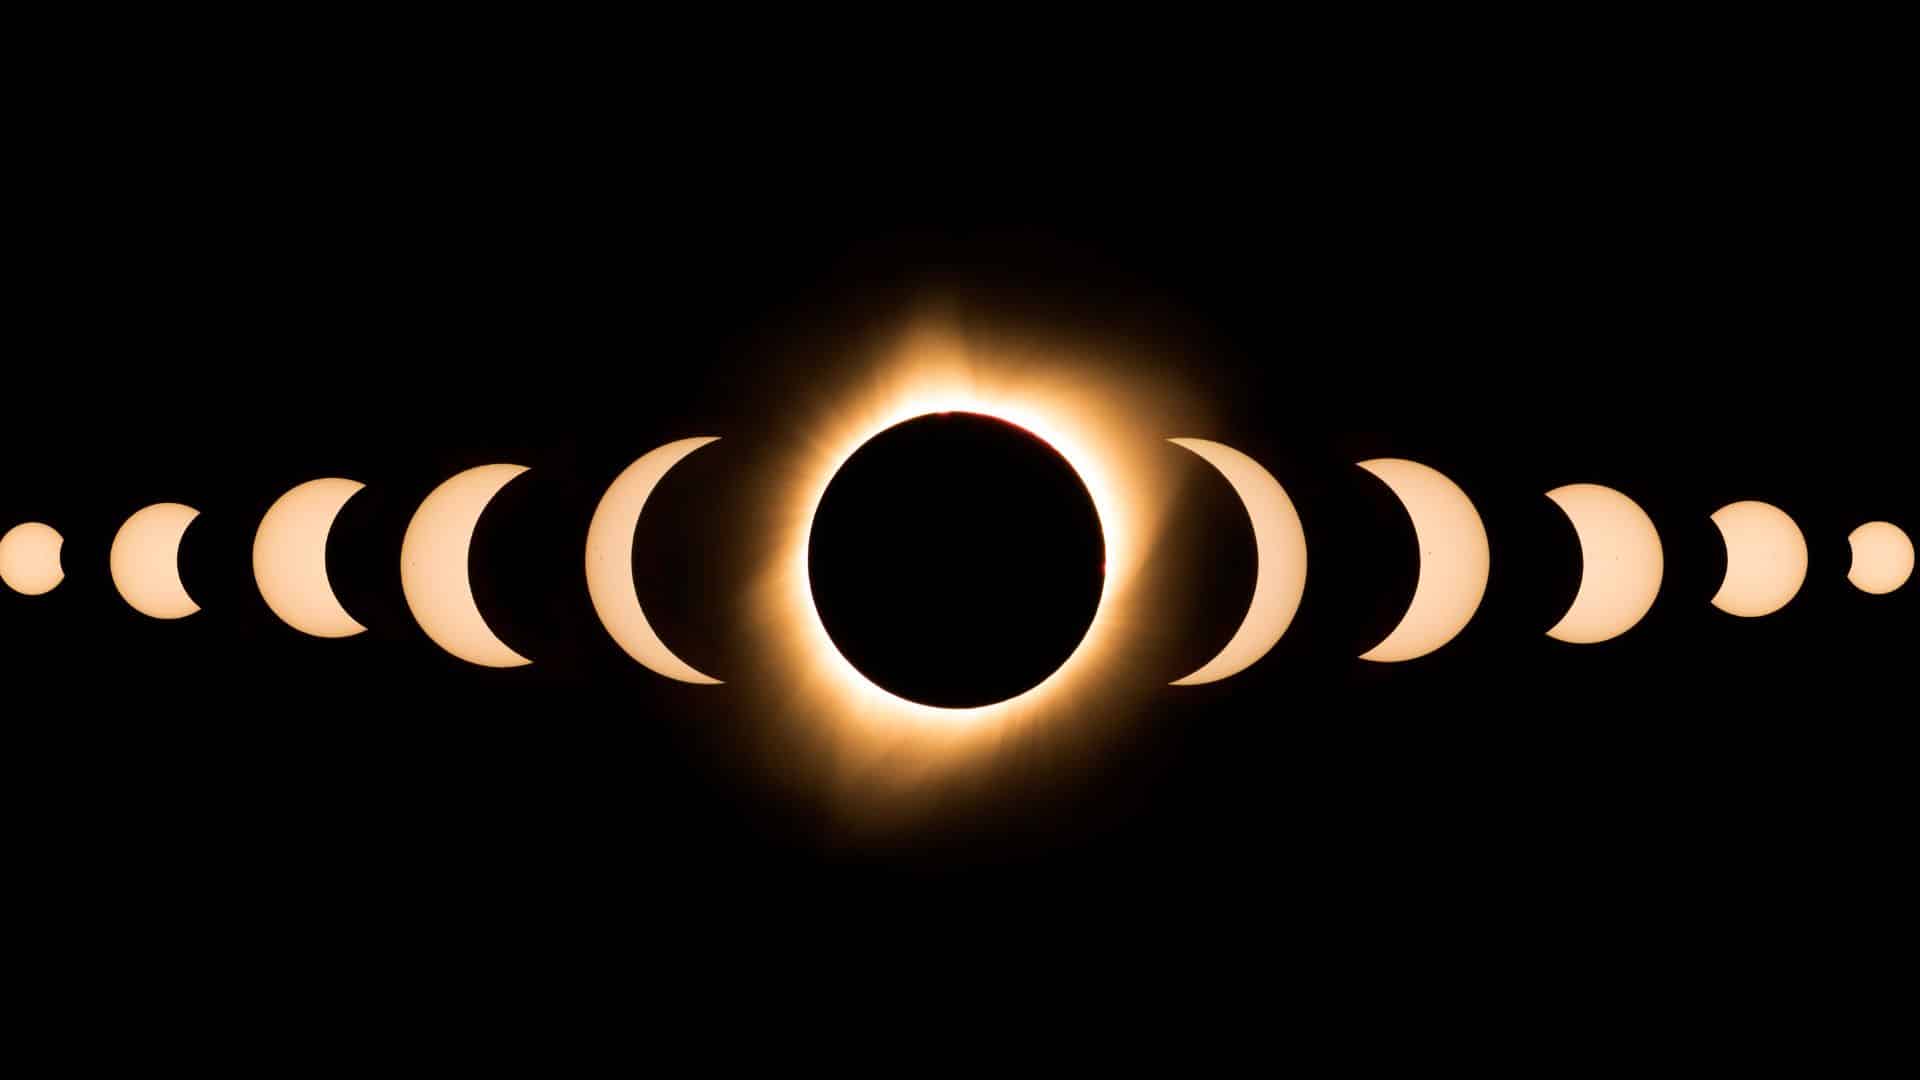 Illustrated timeline of the moon moving across the sun for a solar eclipse.